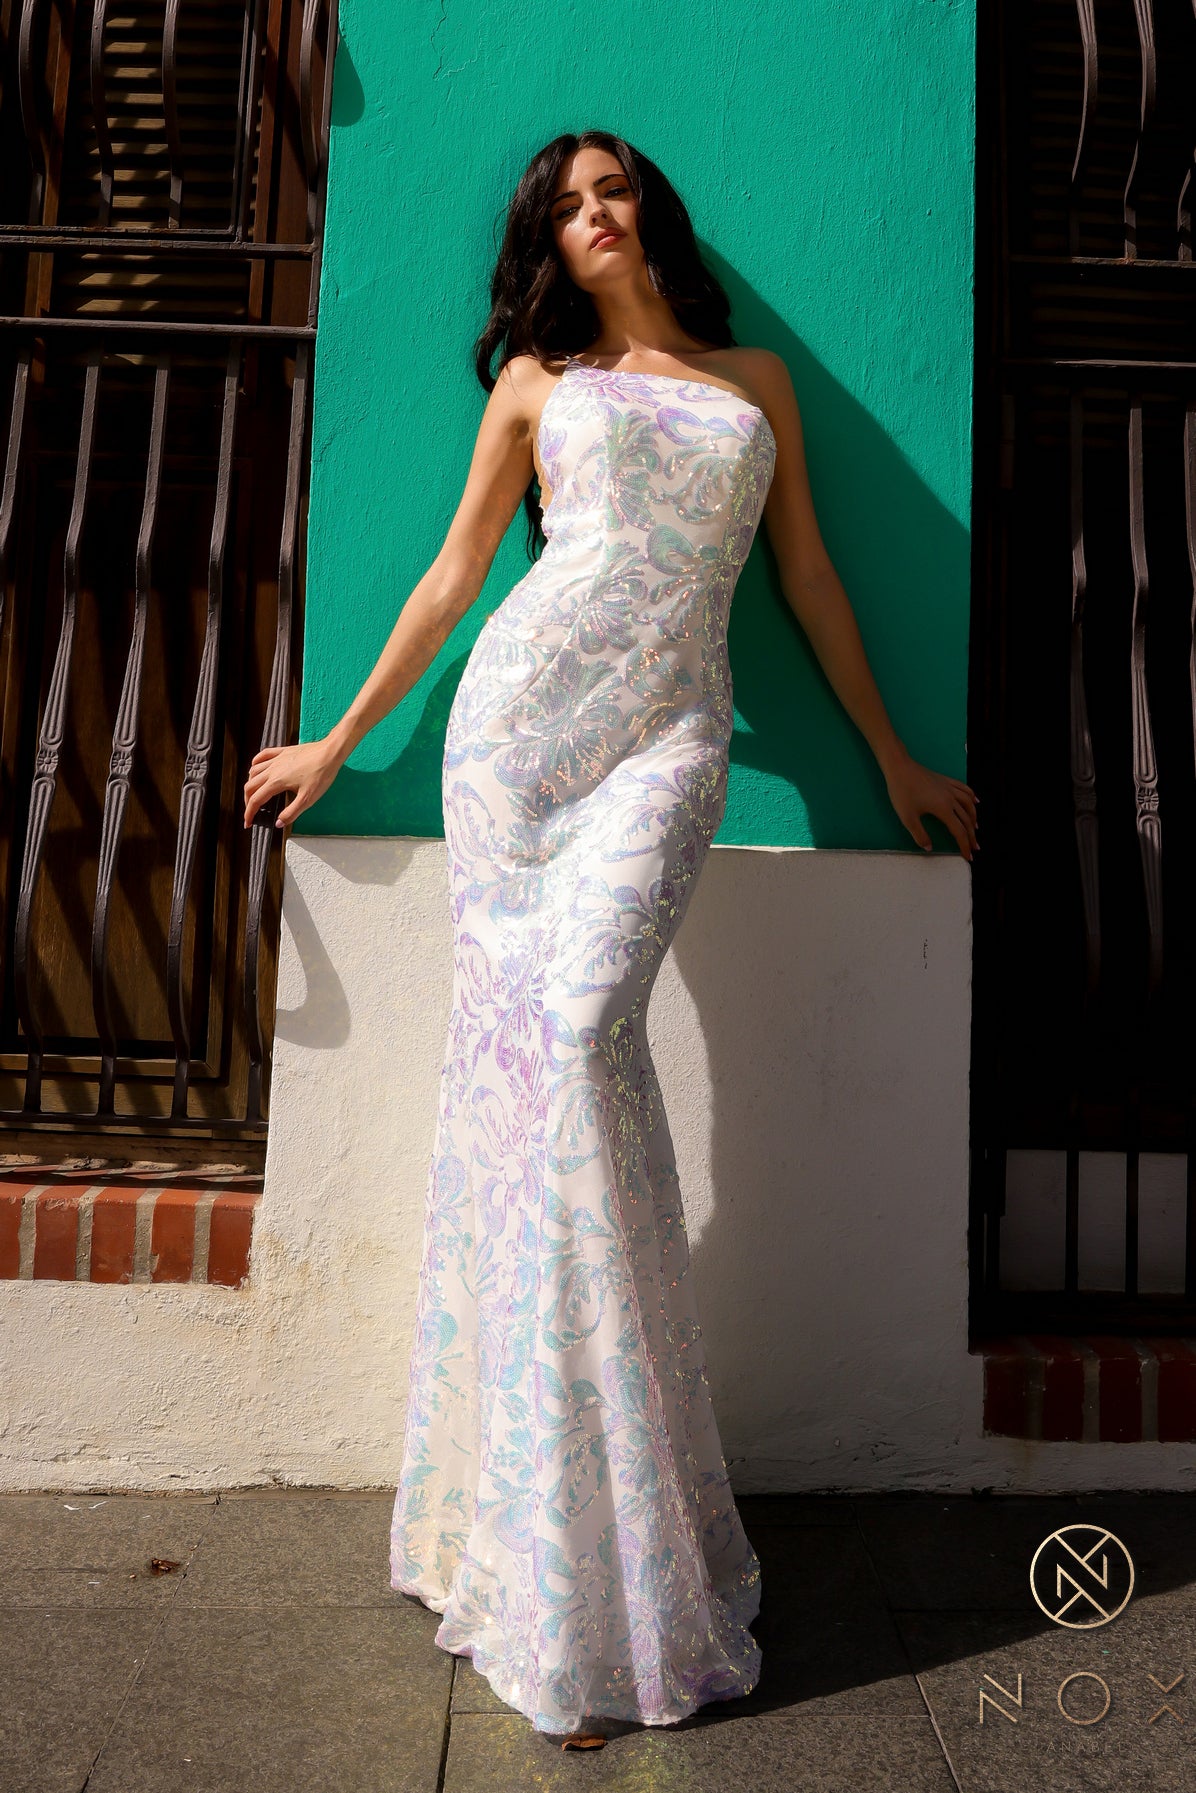 Be the ultimate showstopper in this stunning Nox Anabel R1308 sequin lace one shoulder prom dress. The mermaid silhouette and formal design will give you the confidence to shine on any pageant stage. Guaranteed to make a lasting impression, this gown is a must-have for any special occasion.  Size: 0-16  Colors: Fuchsia, Aqua Blue, White Multi